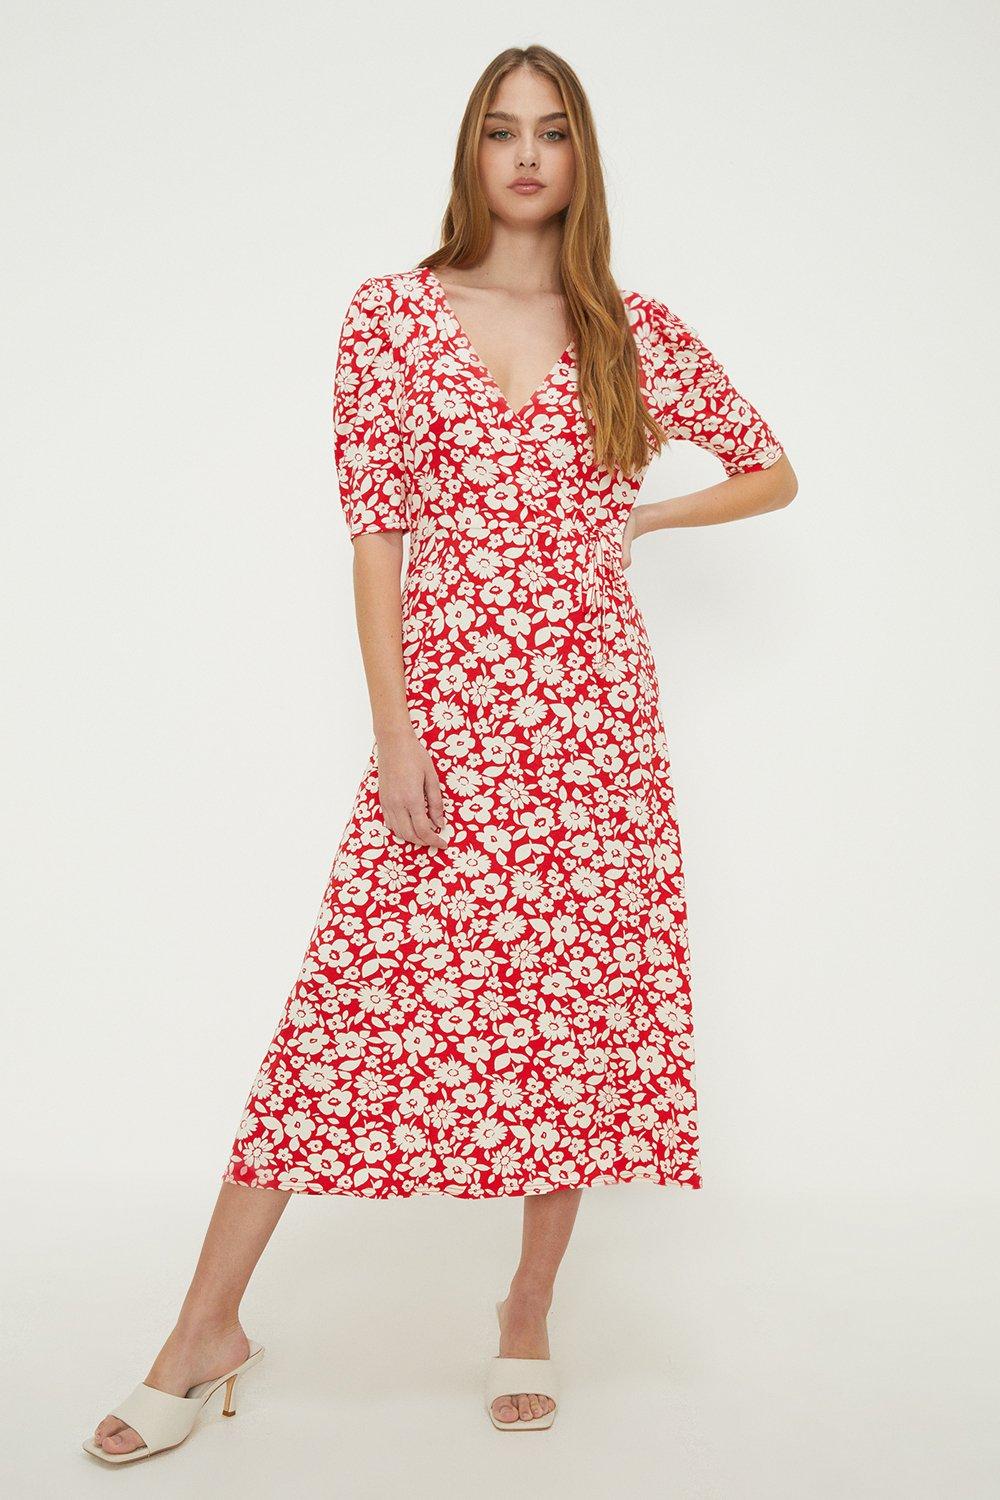 Women’s Red Floral Ruched Sleeve Wrap Dress - 8